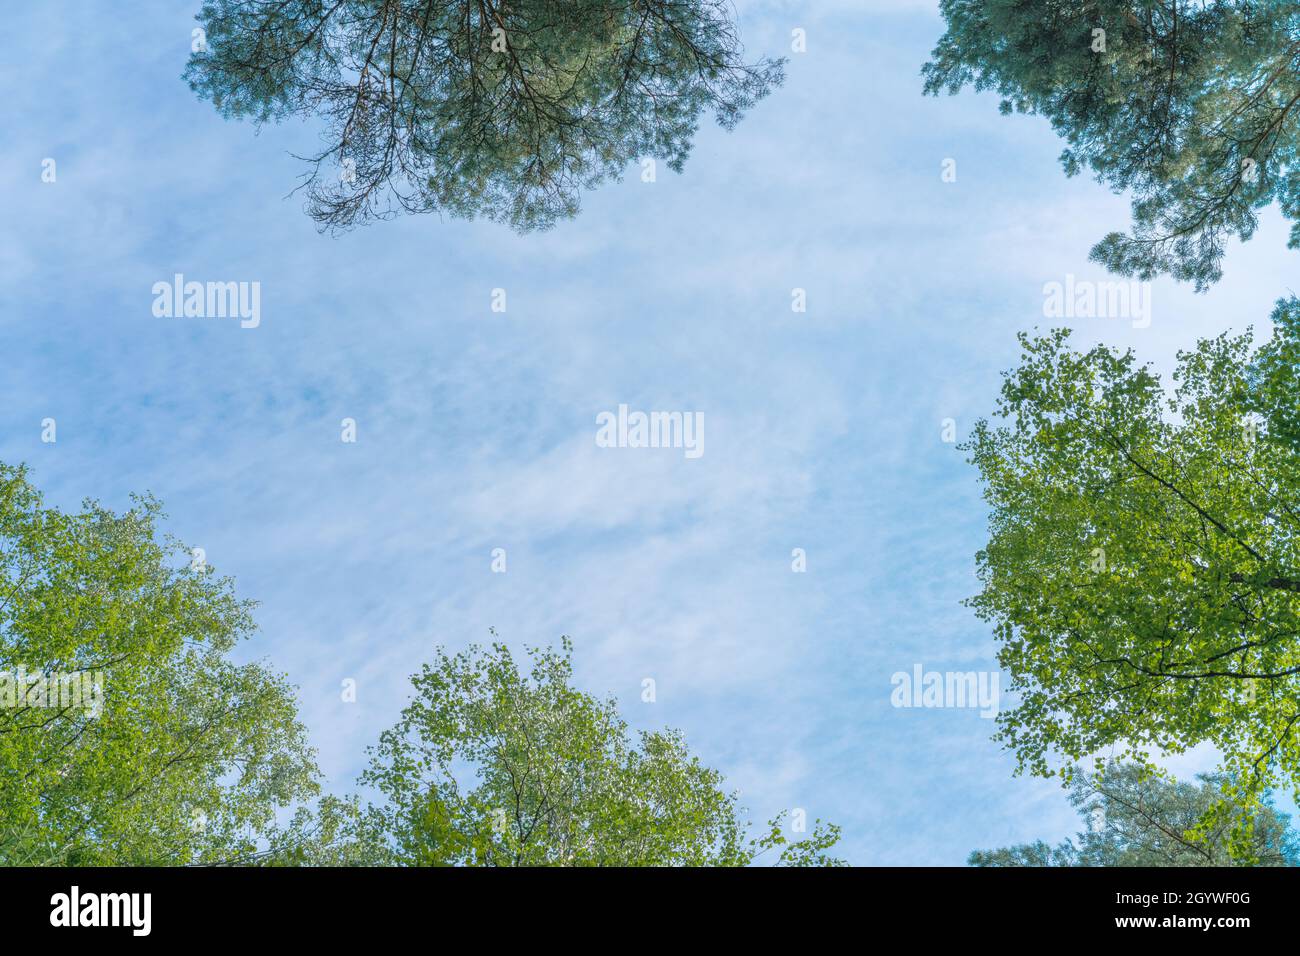 tree crowns in springlike green, view from bottom up. fir and beech leaves. blue sky with copy space Stock Photo